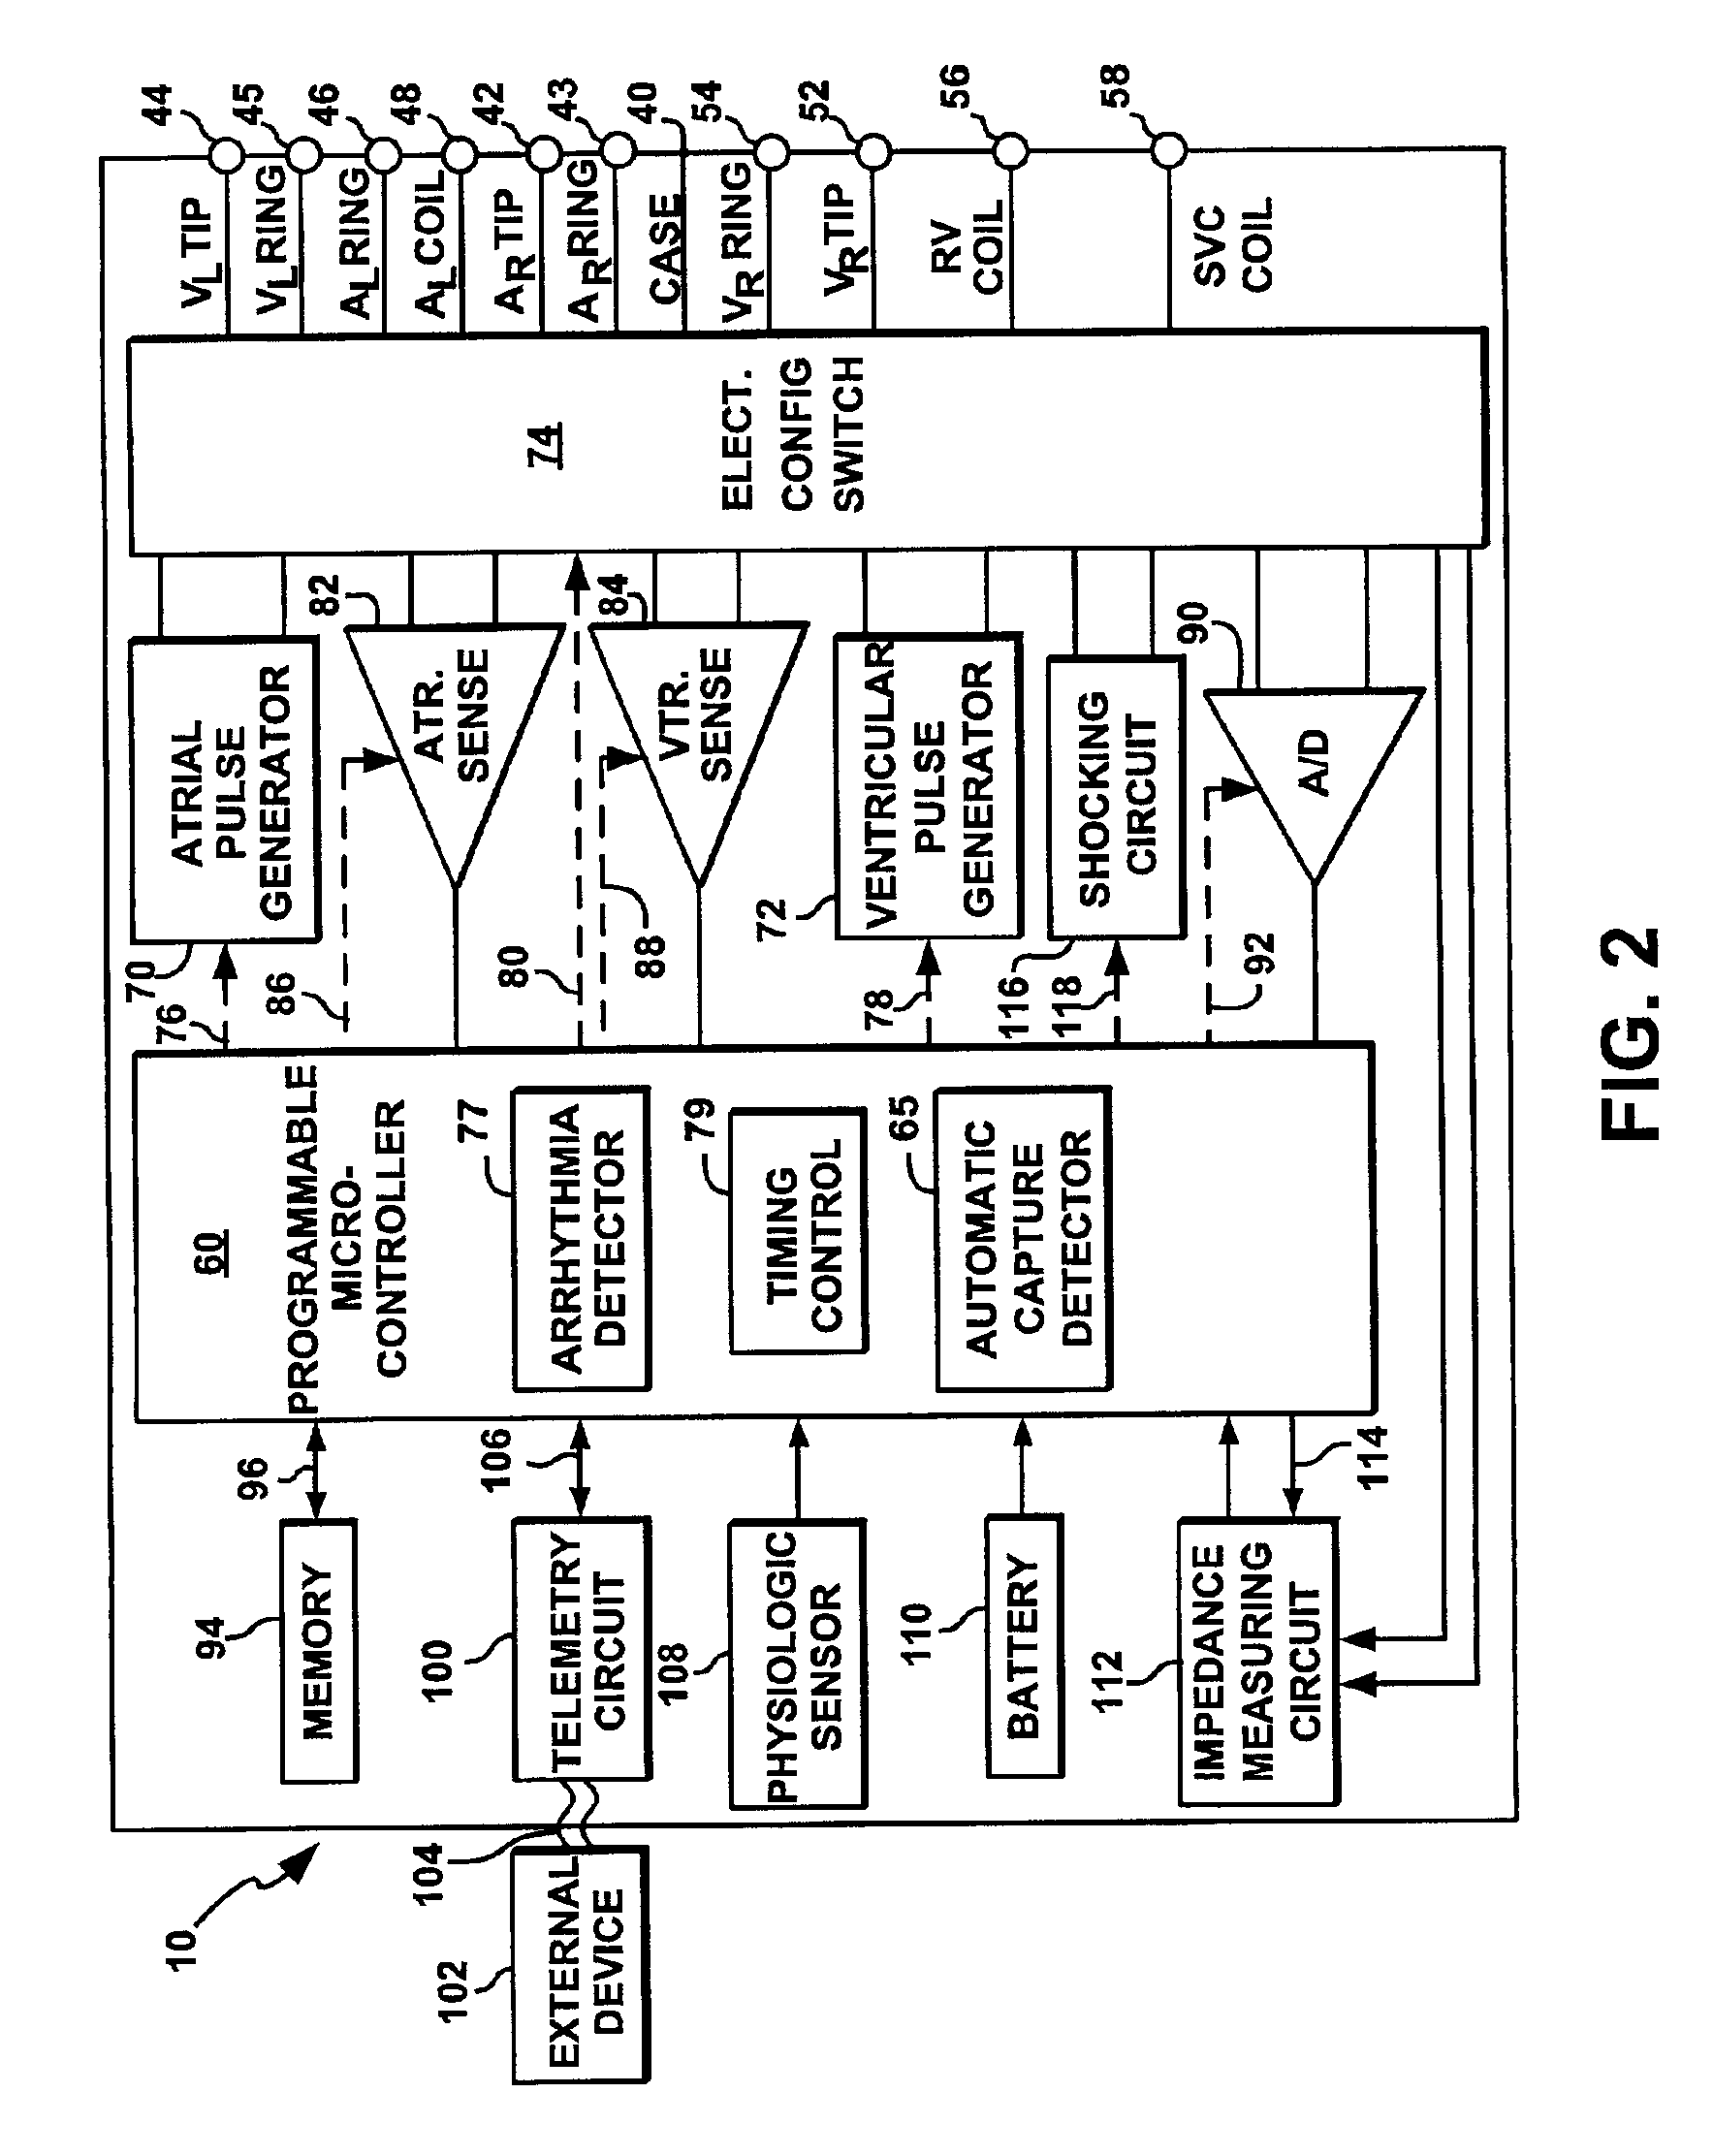 Method and apparatus for automatic capture verification using polarity discrimination of evoked response